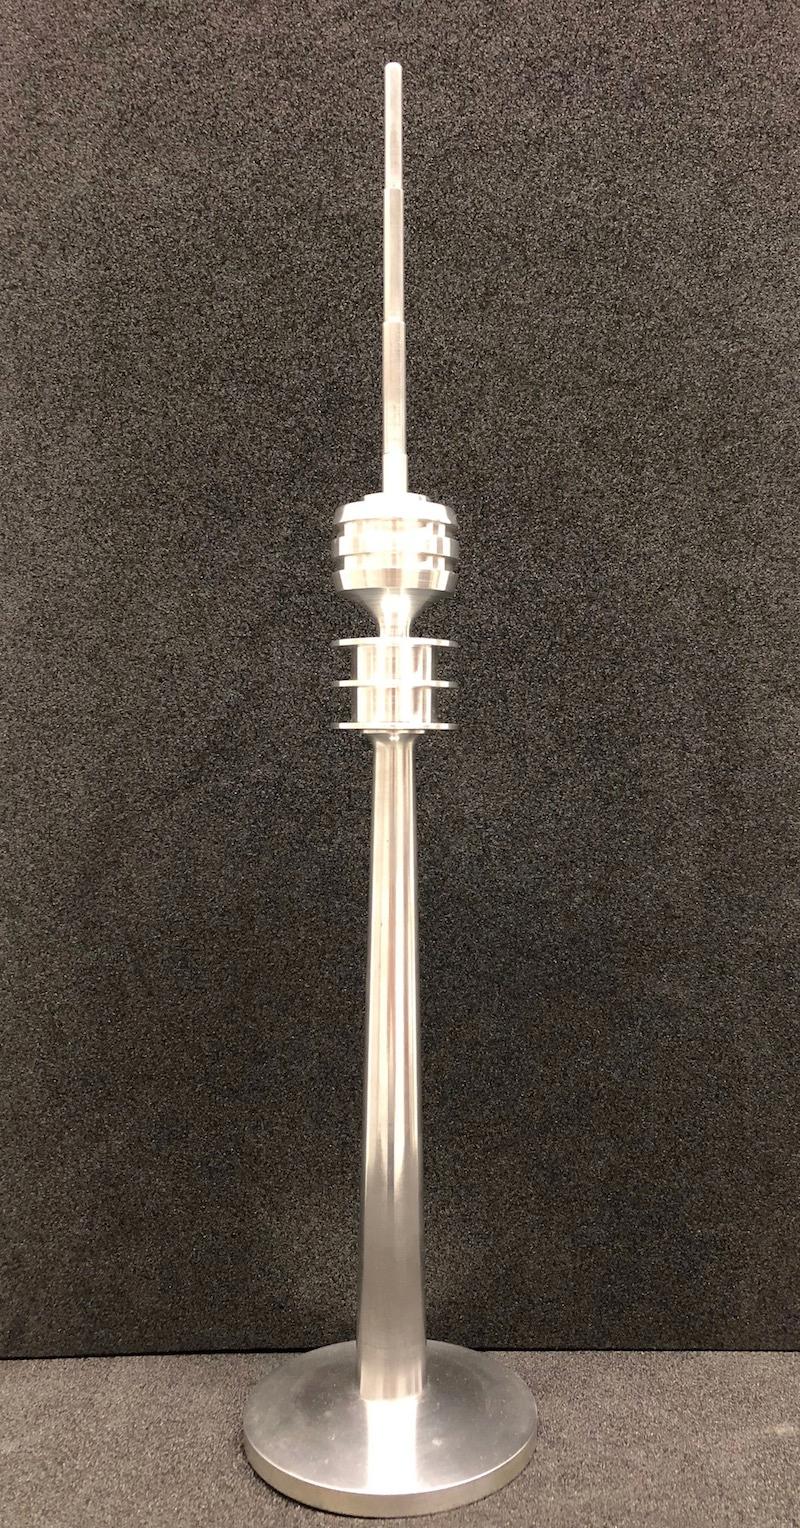 Scaled model of the Munich television tower. Hand-spun in aluminium. A nice architectural sculpture for every living or mans room.